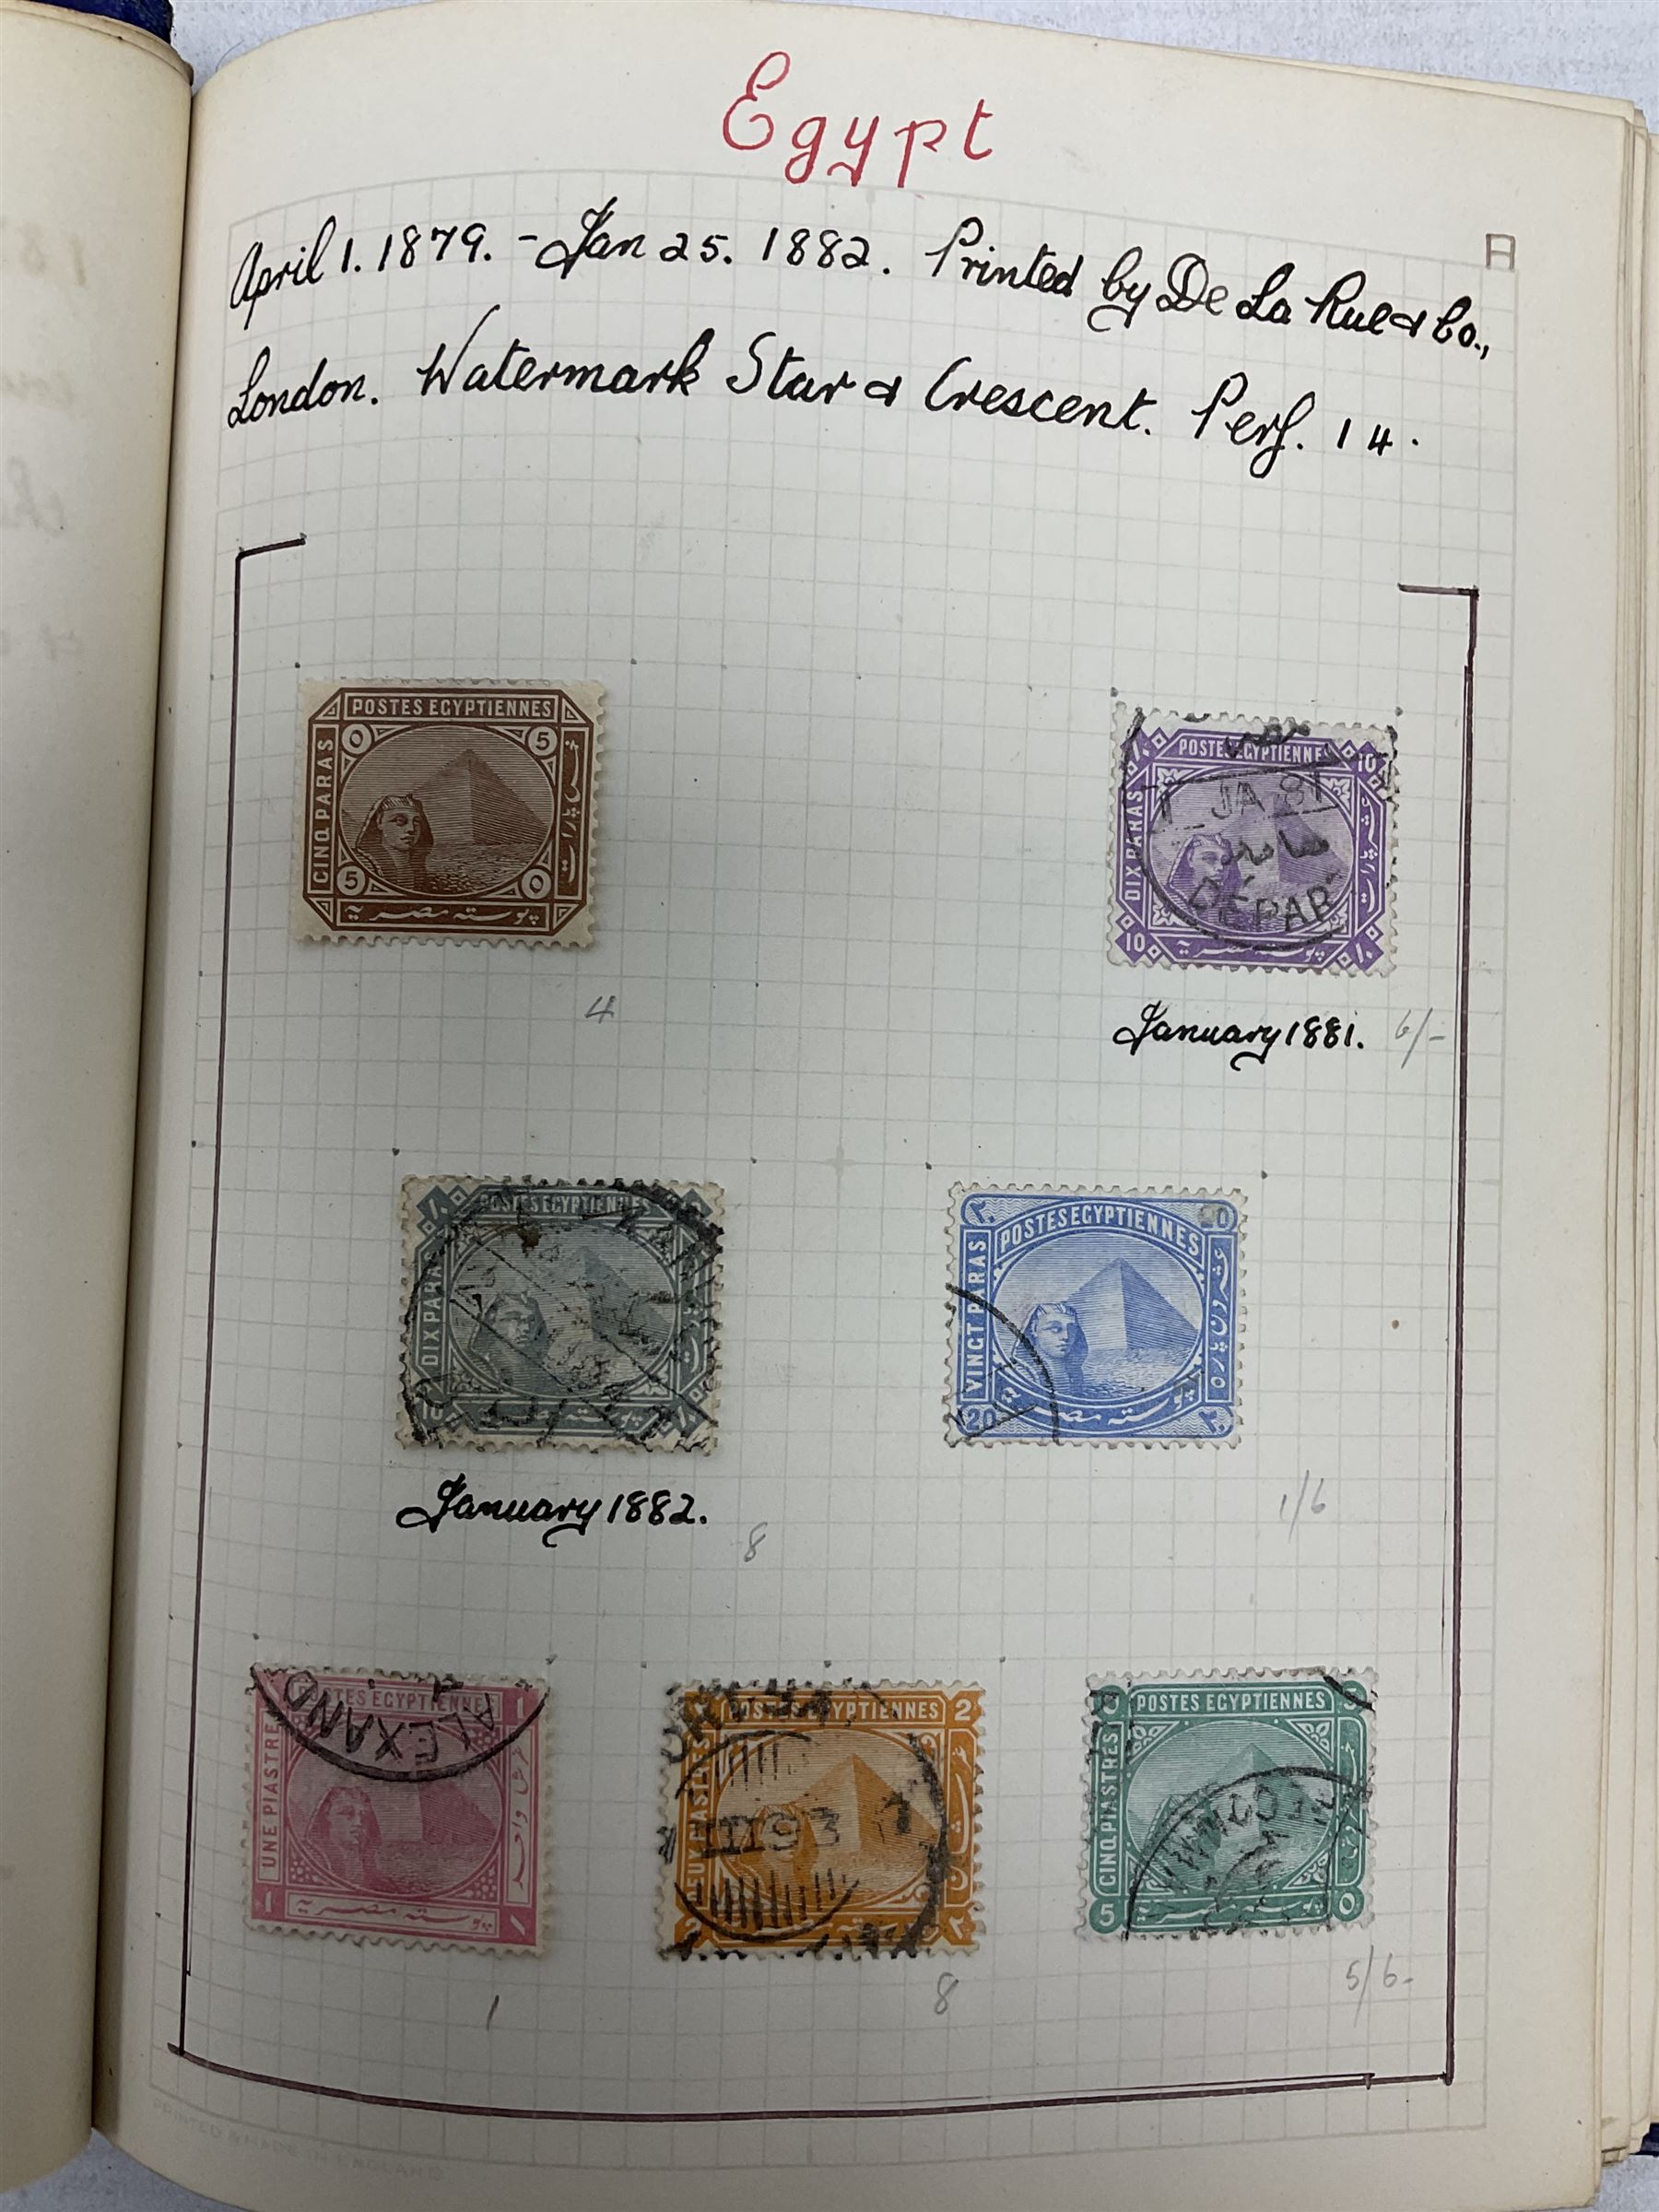 Egypt 1866 and later stamps - Image 53 of 761